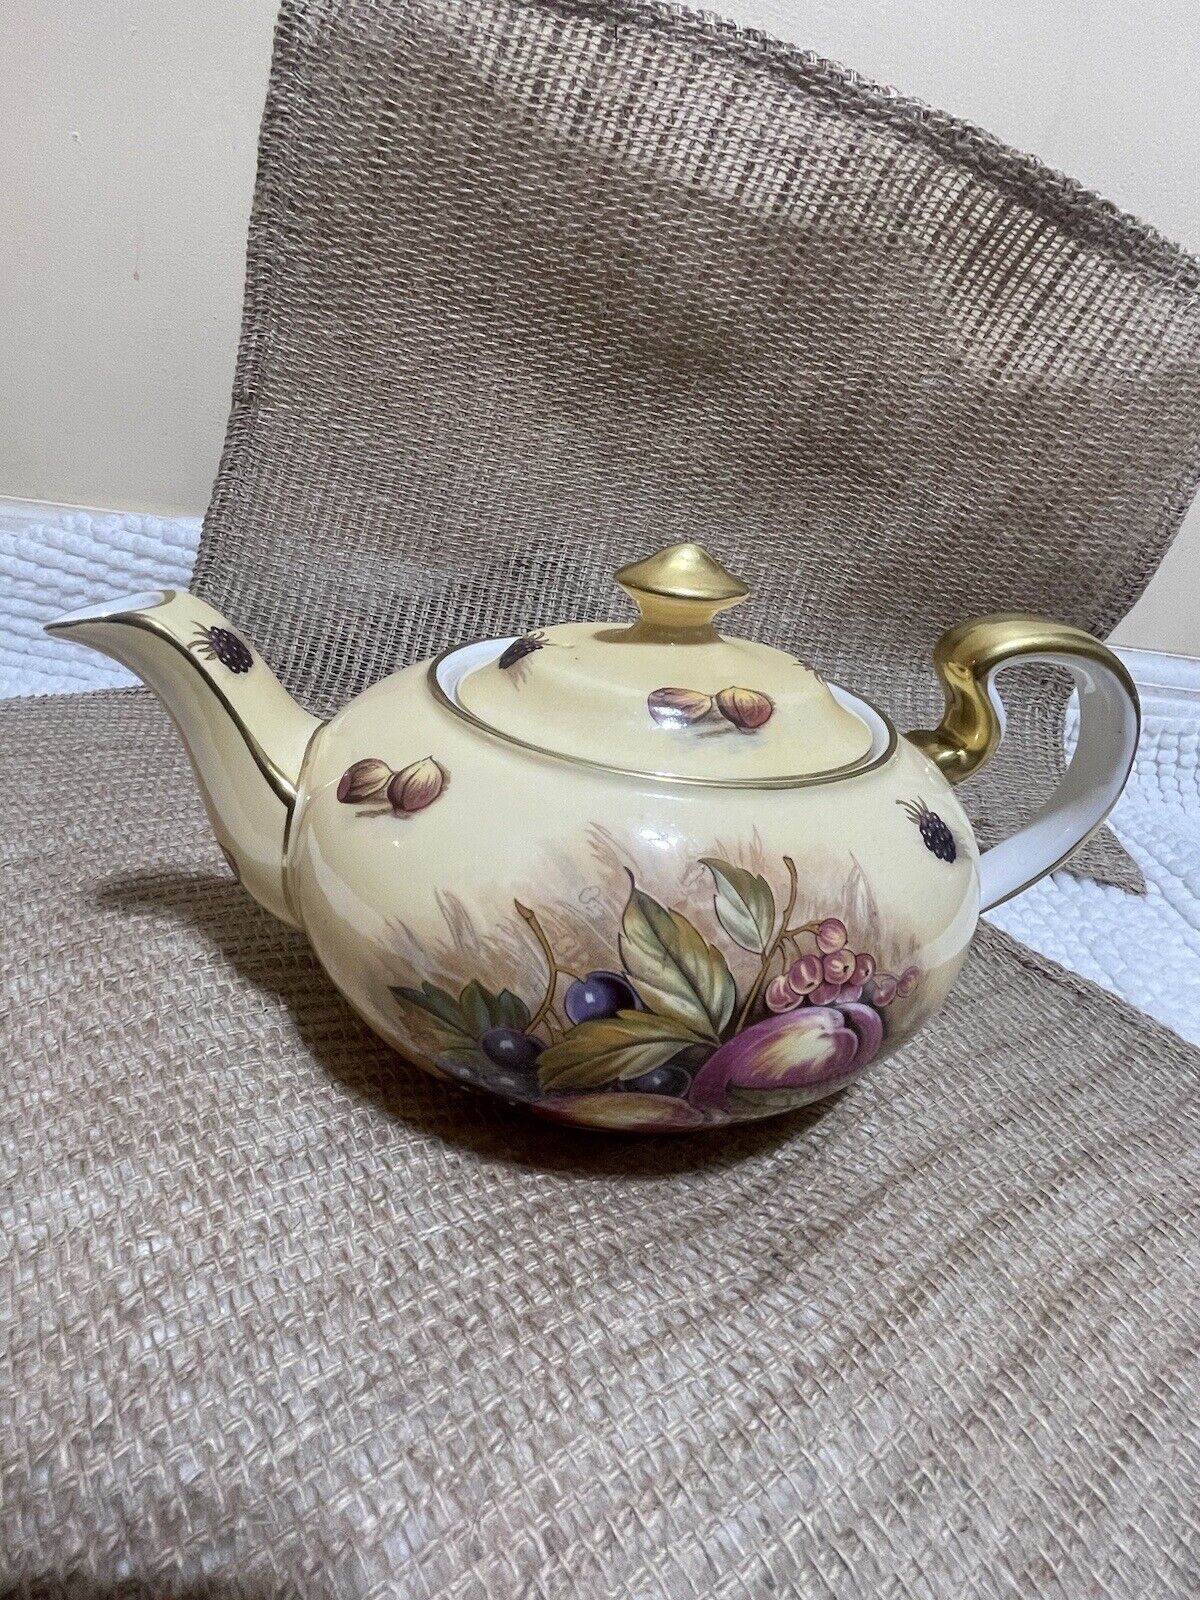 Vintage Aynsley Orchard Gold TeaPot made in England Excellent Condition- Rare